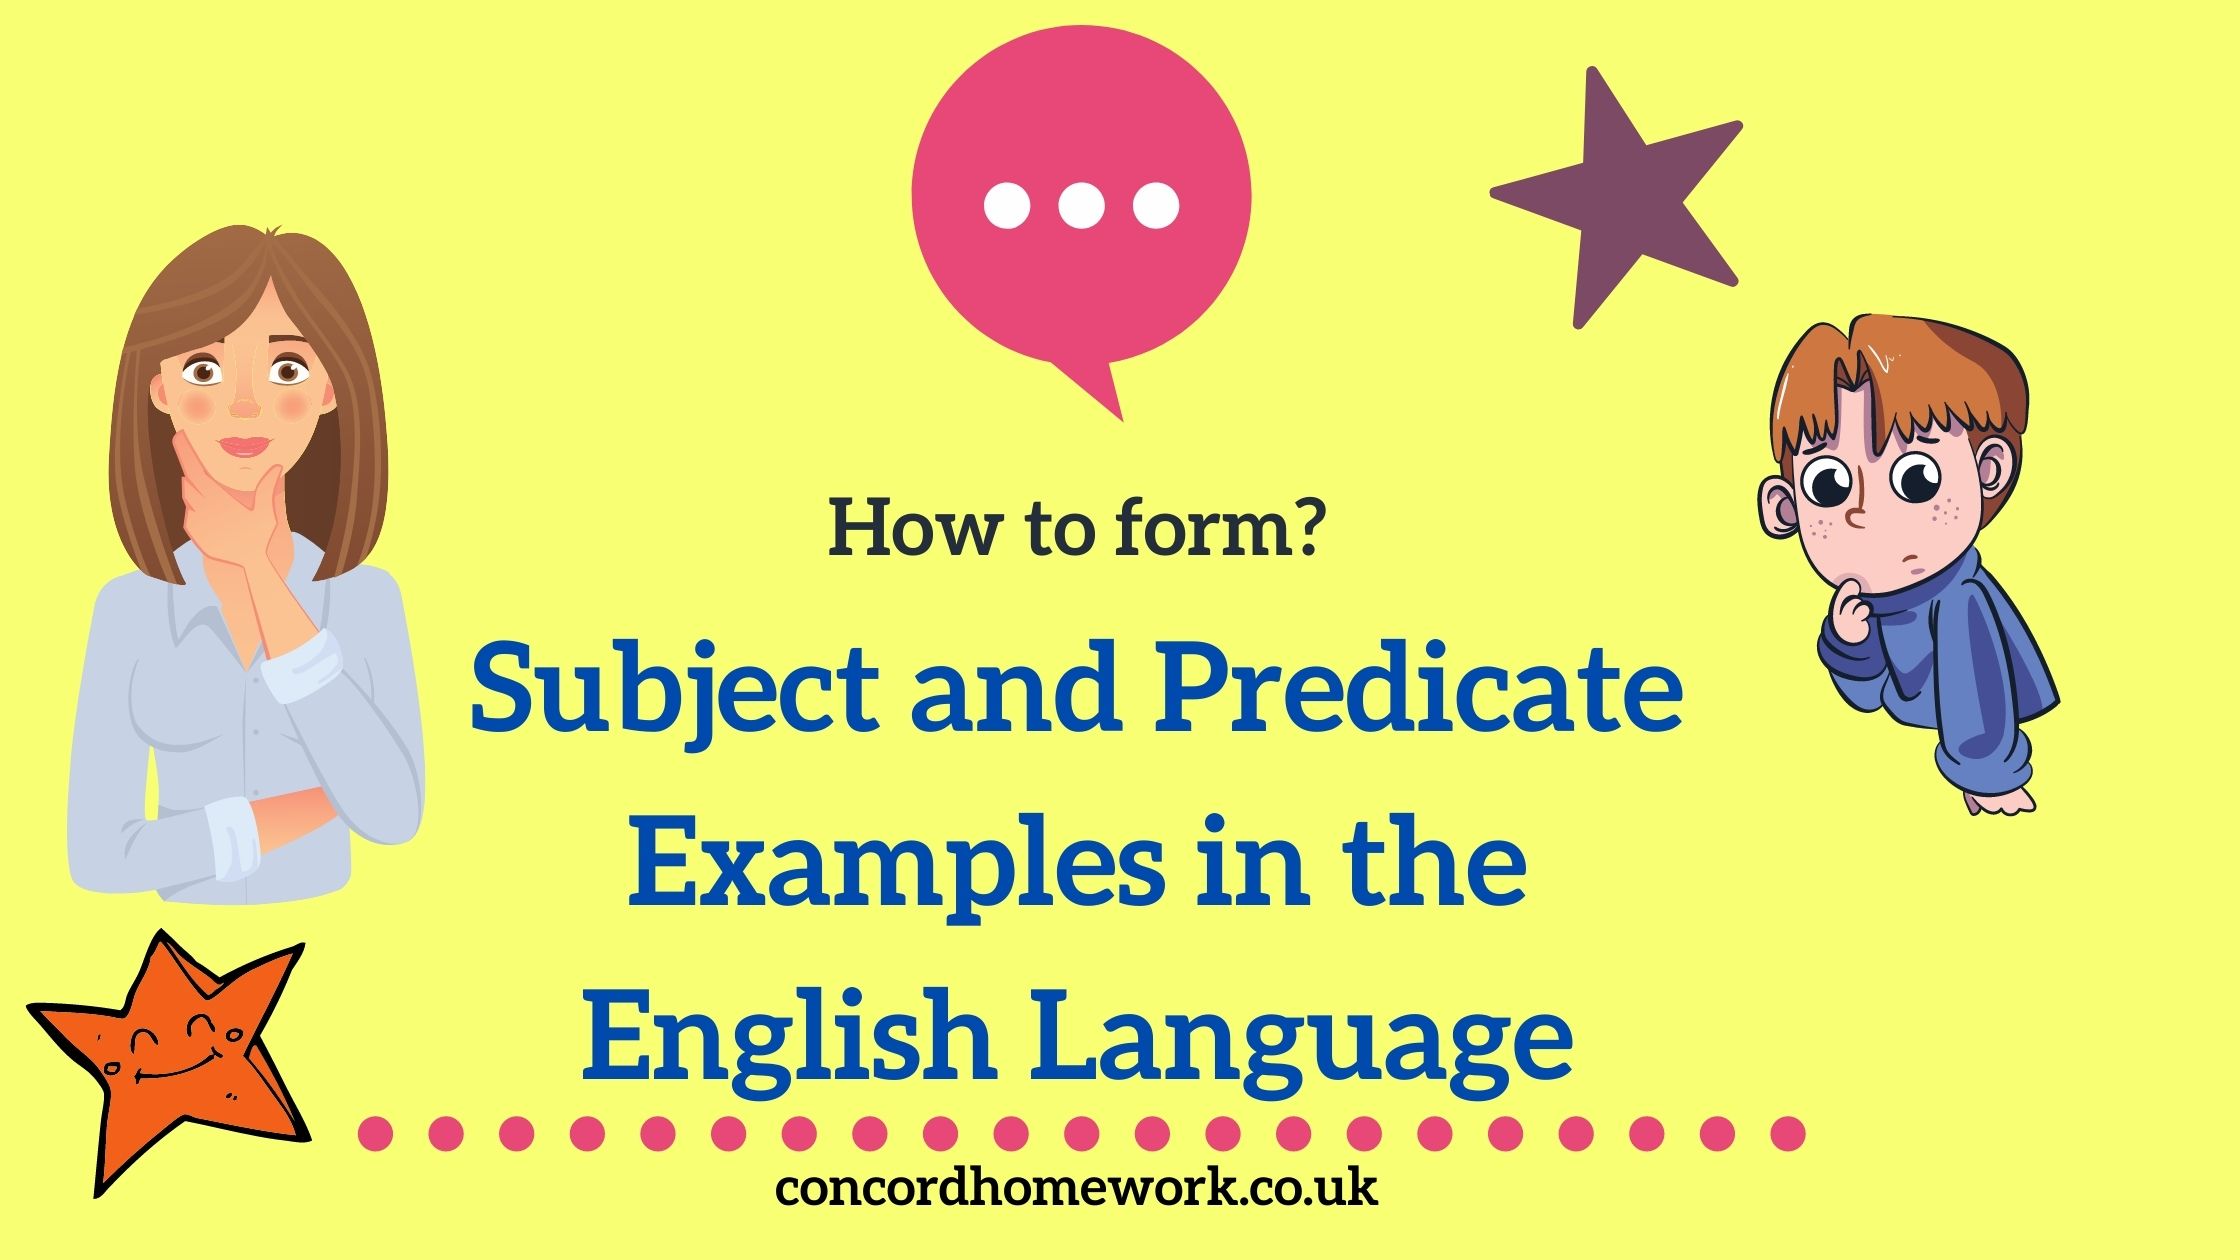 Subject and Predicate Examples in English Language